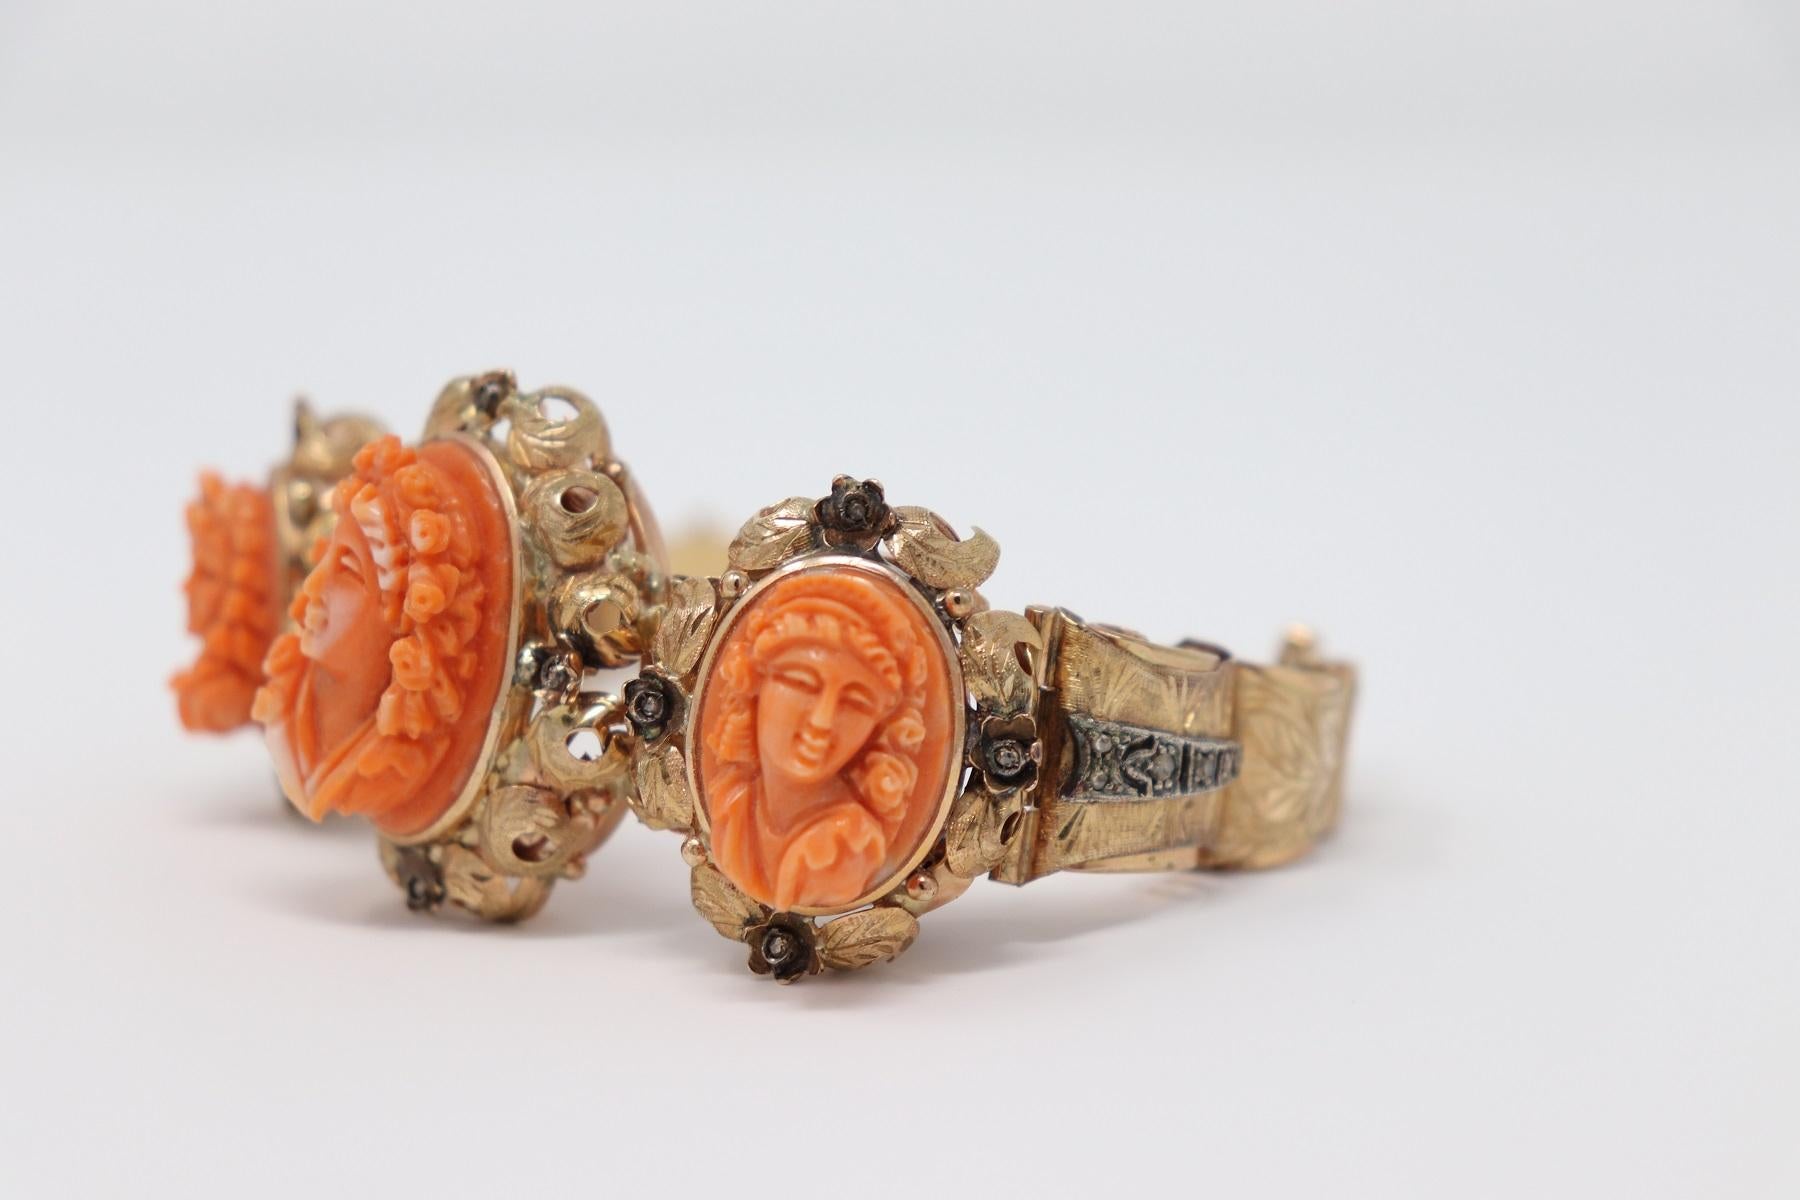 Italian Antique Bracelet in Rose Gold Diamonds and Cameos in Coral